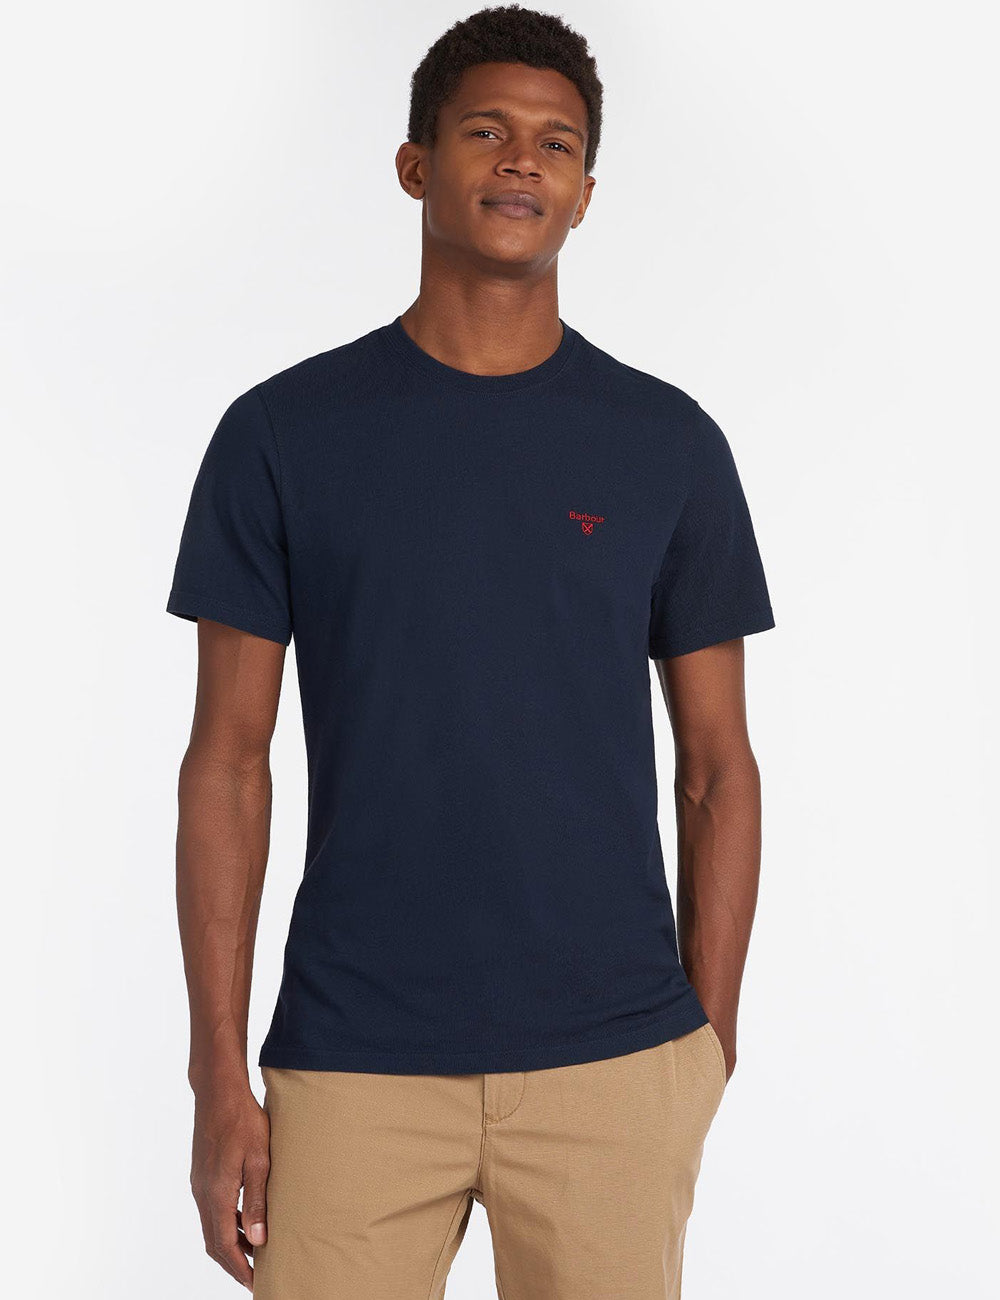 Barbour Sports T-Shirt - Navy